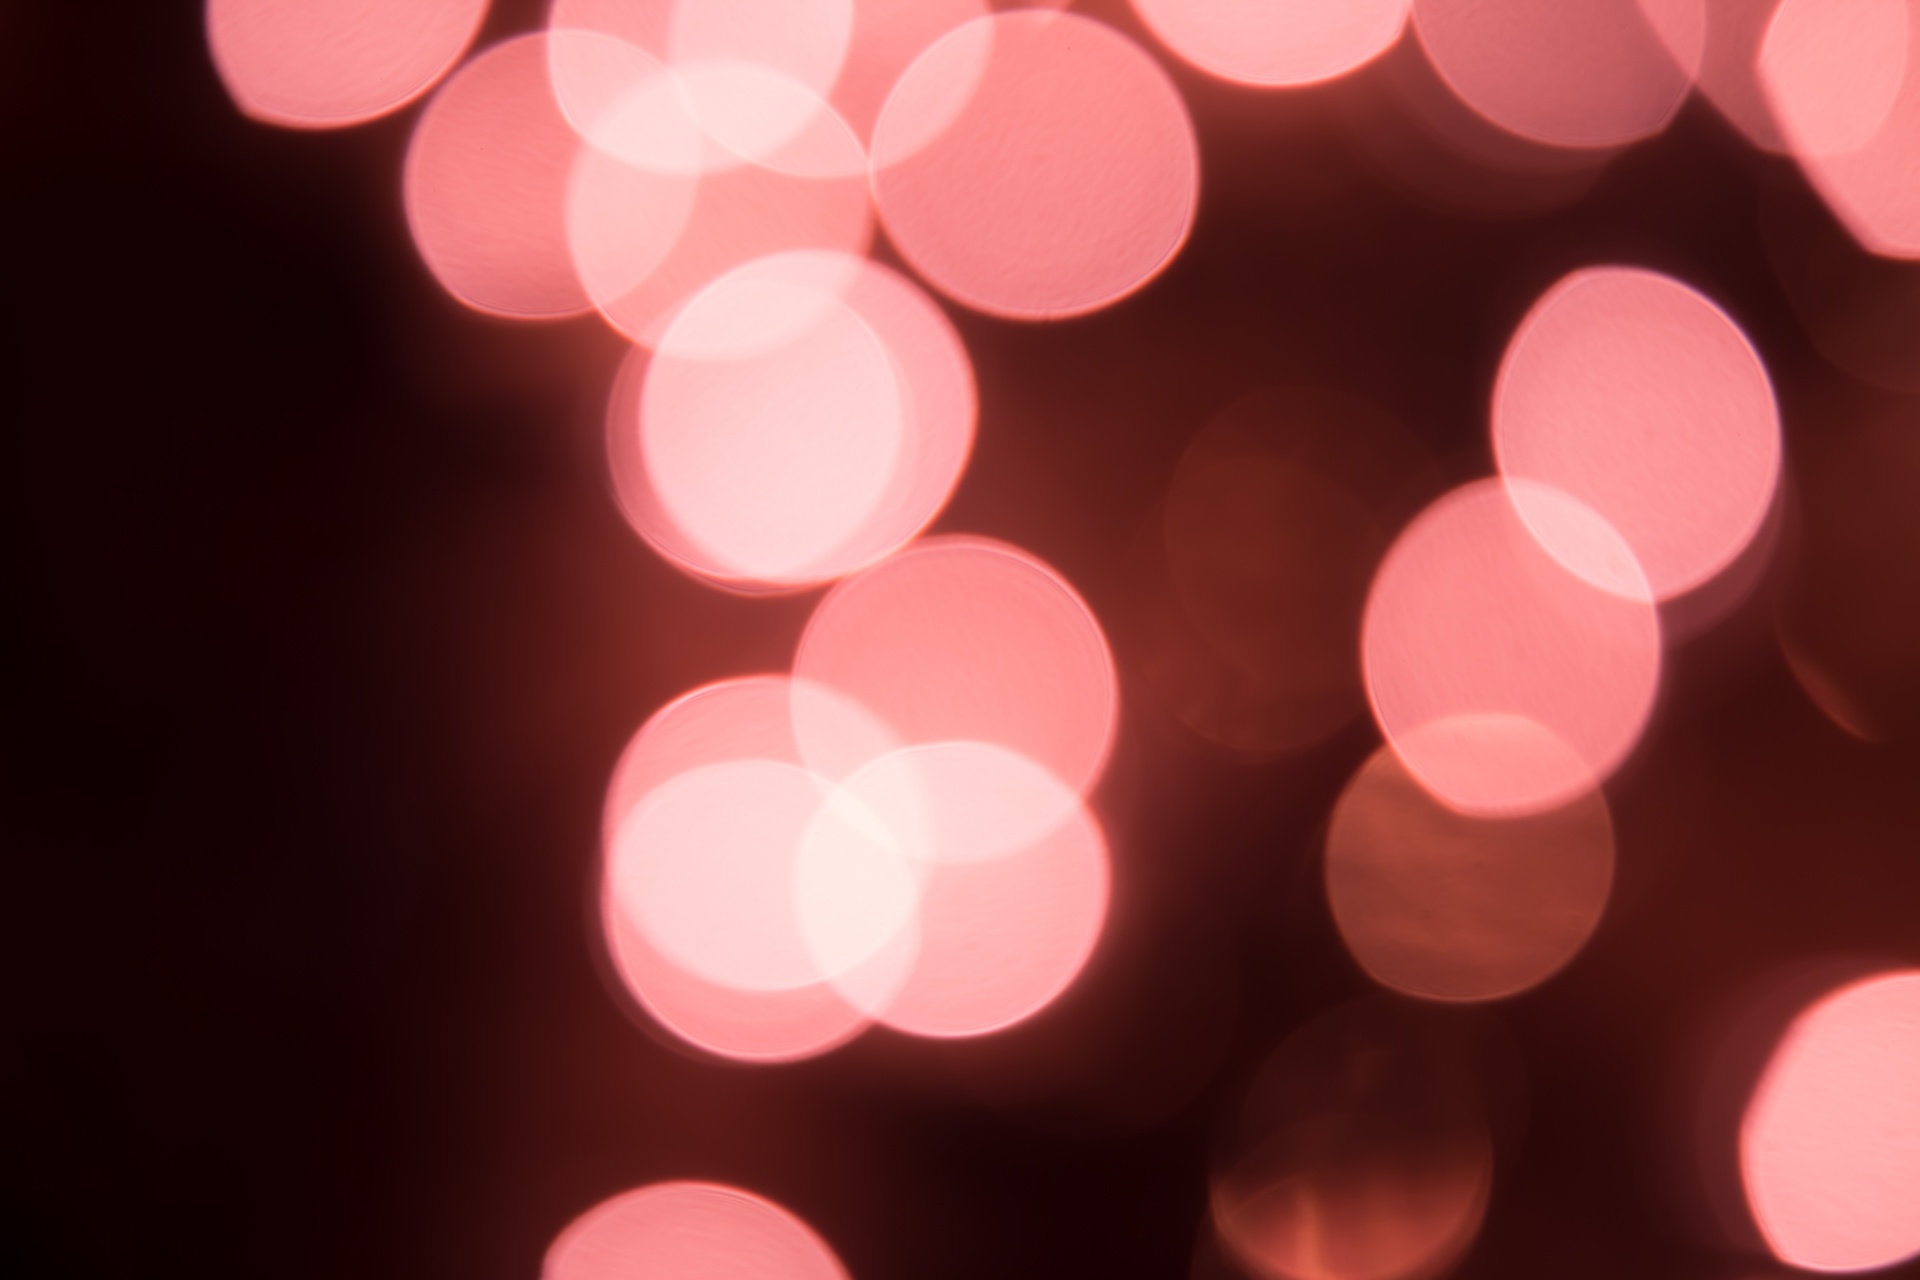 Bokeh Background Free Stock Photo Public Domain Pictures